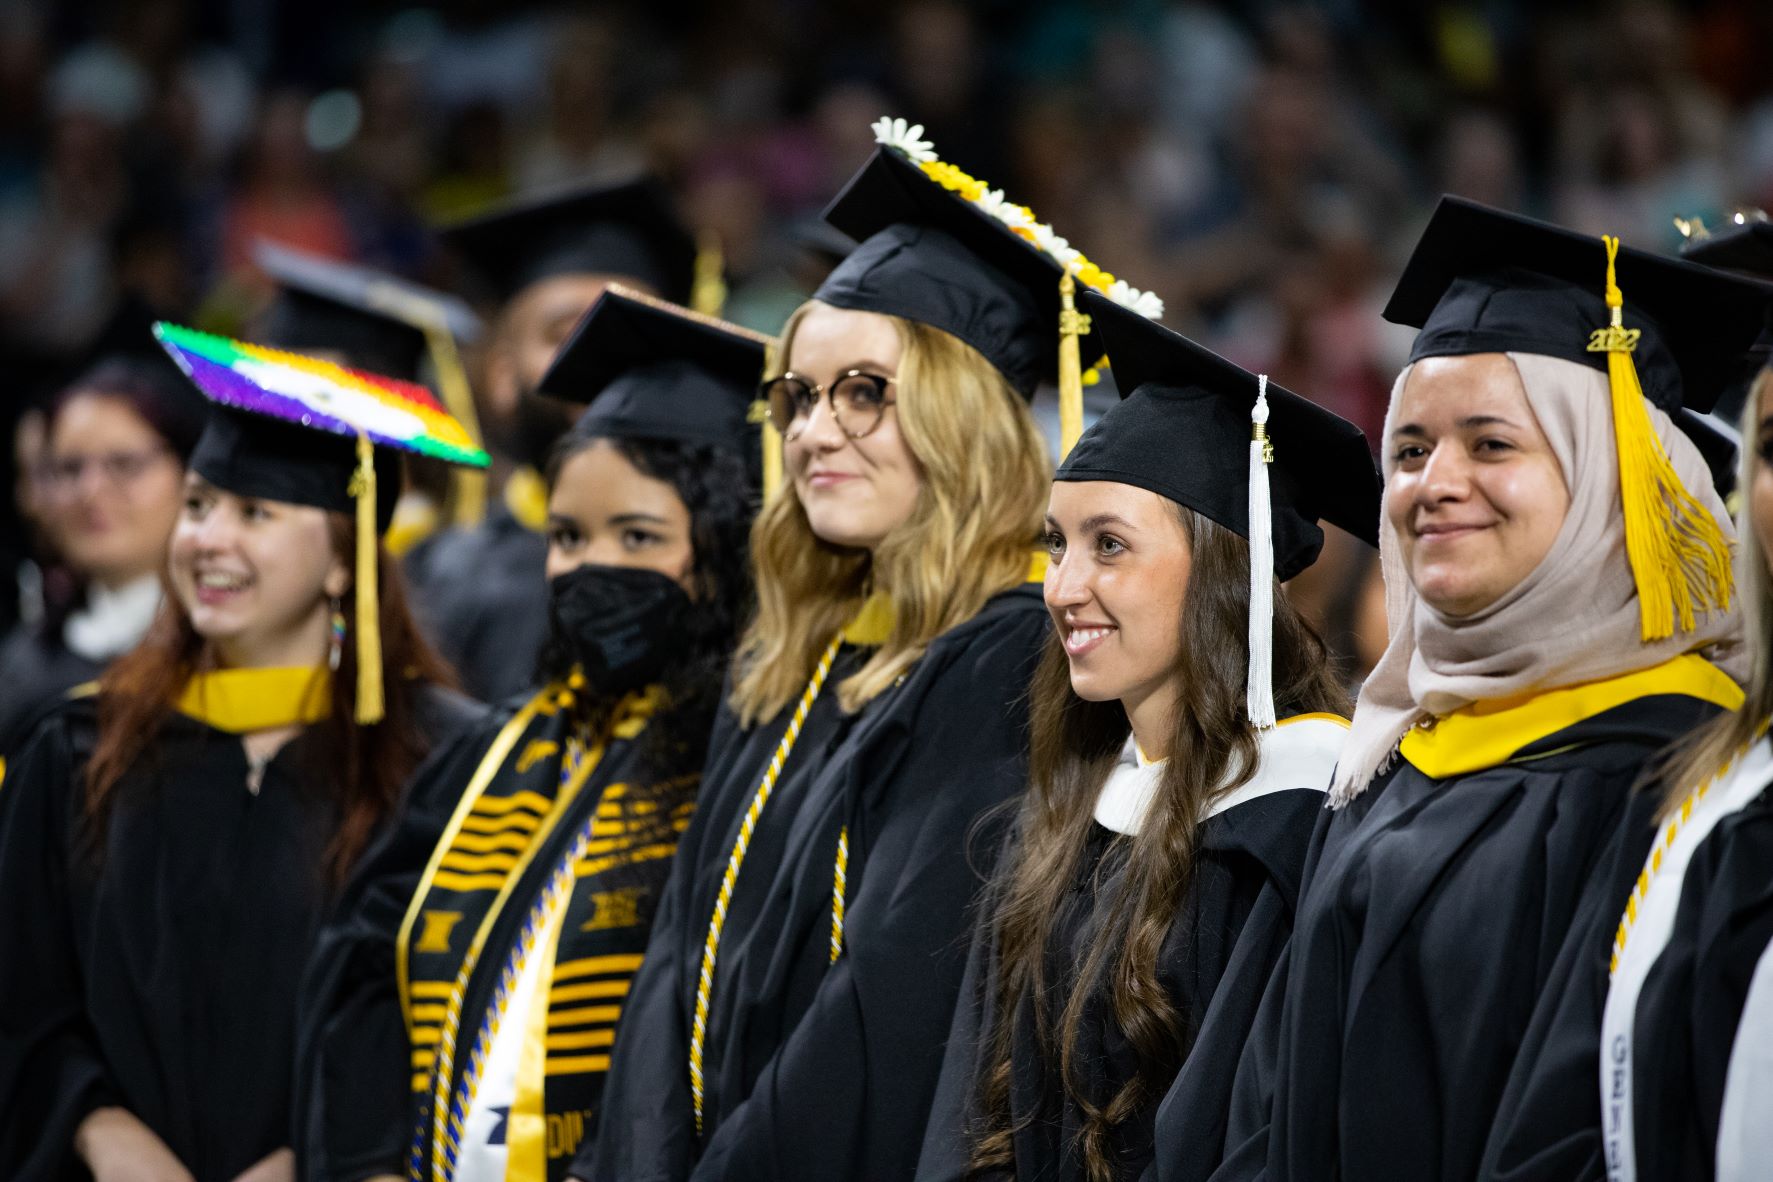 Students standing in their graduation attire